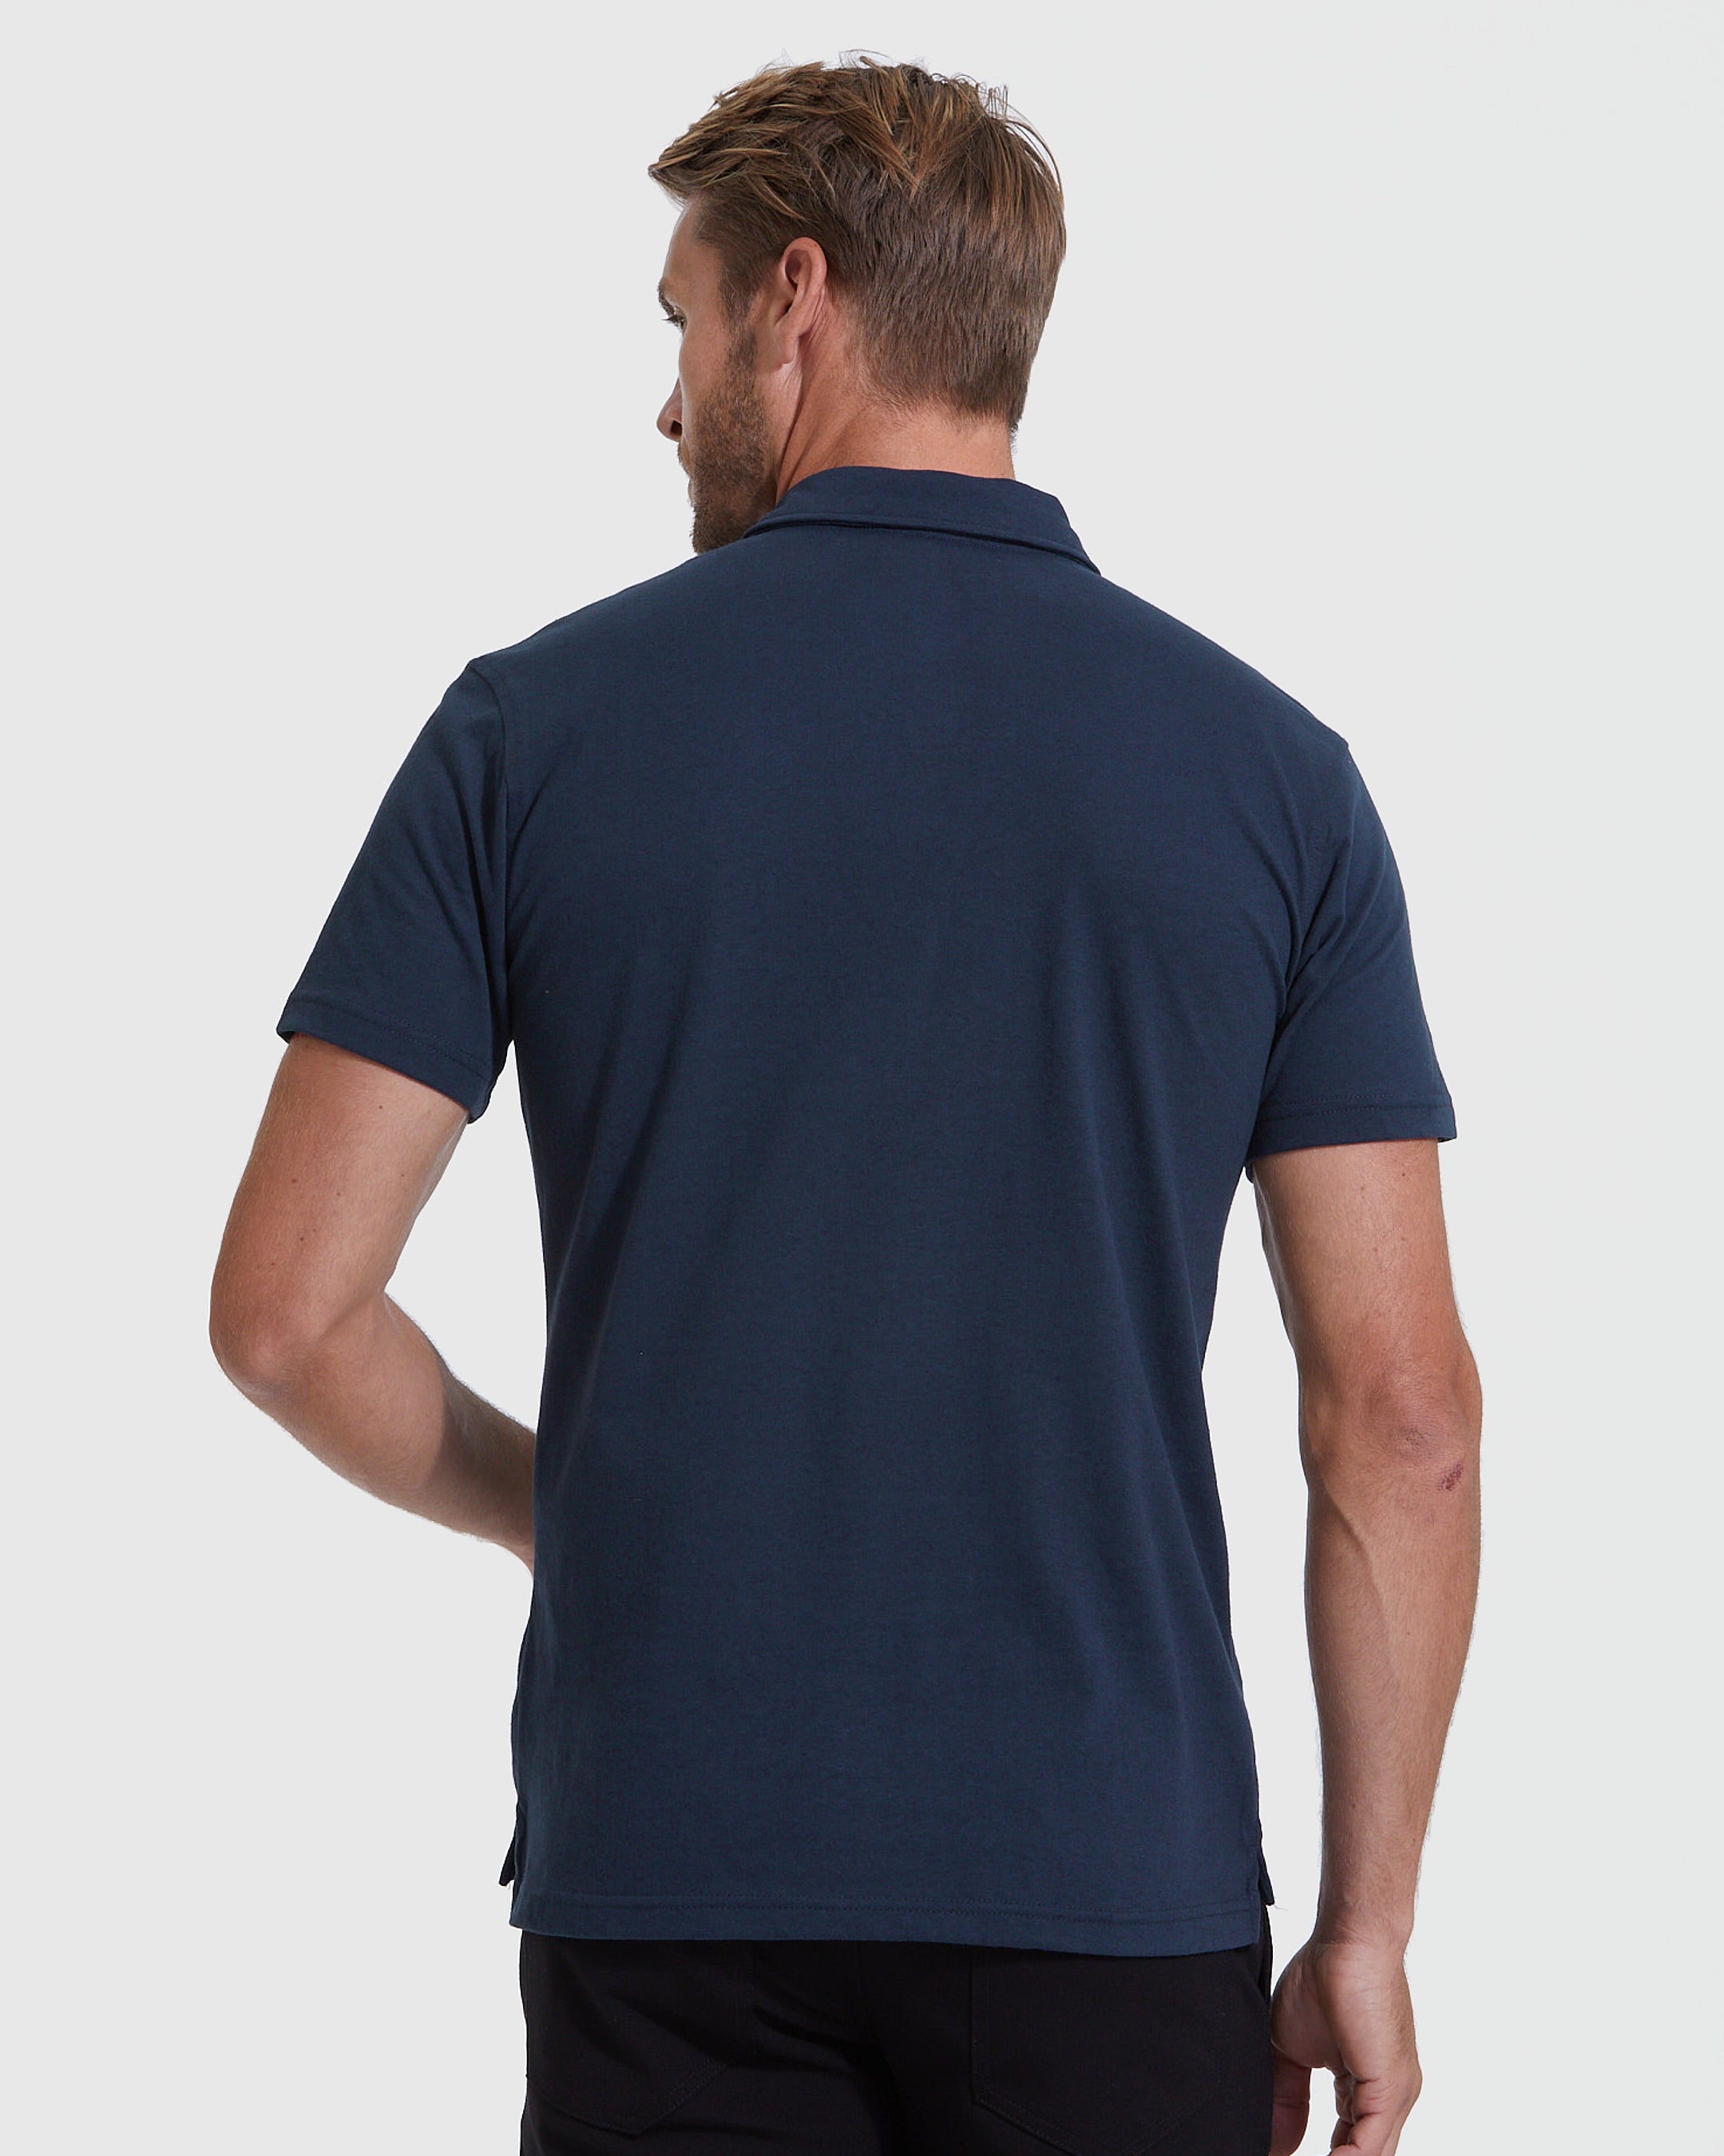 All Navy Polo 6-Pack